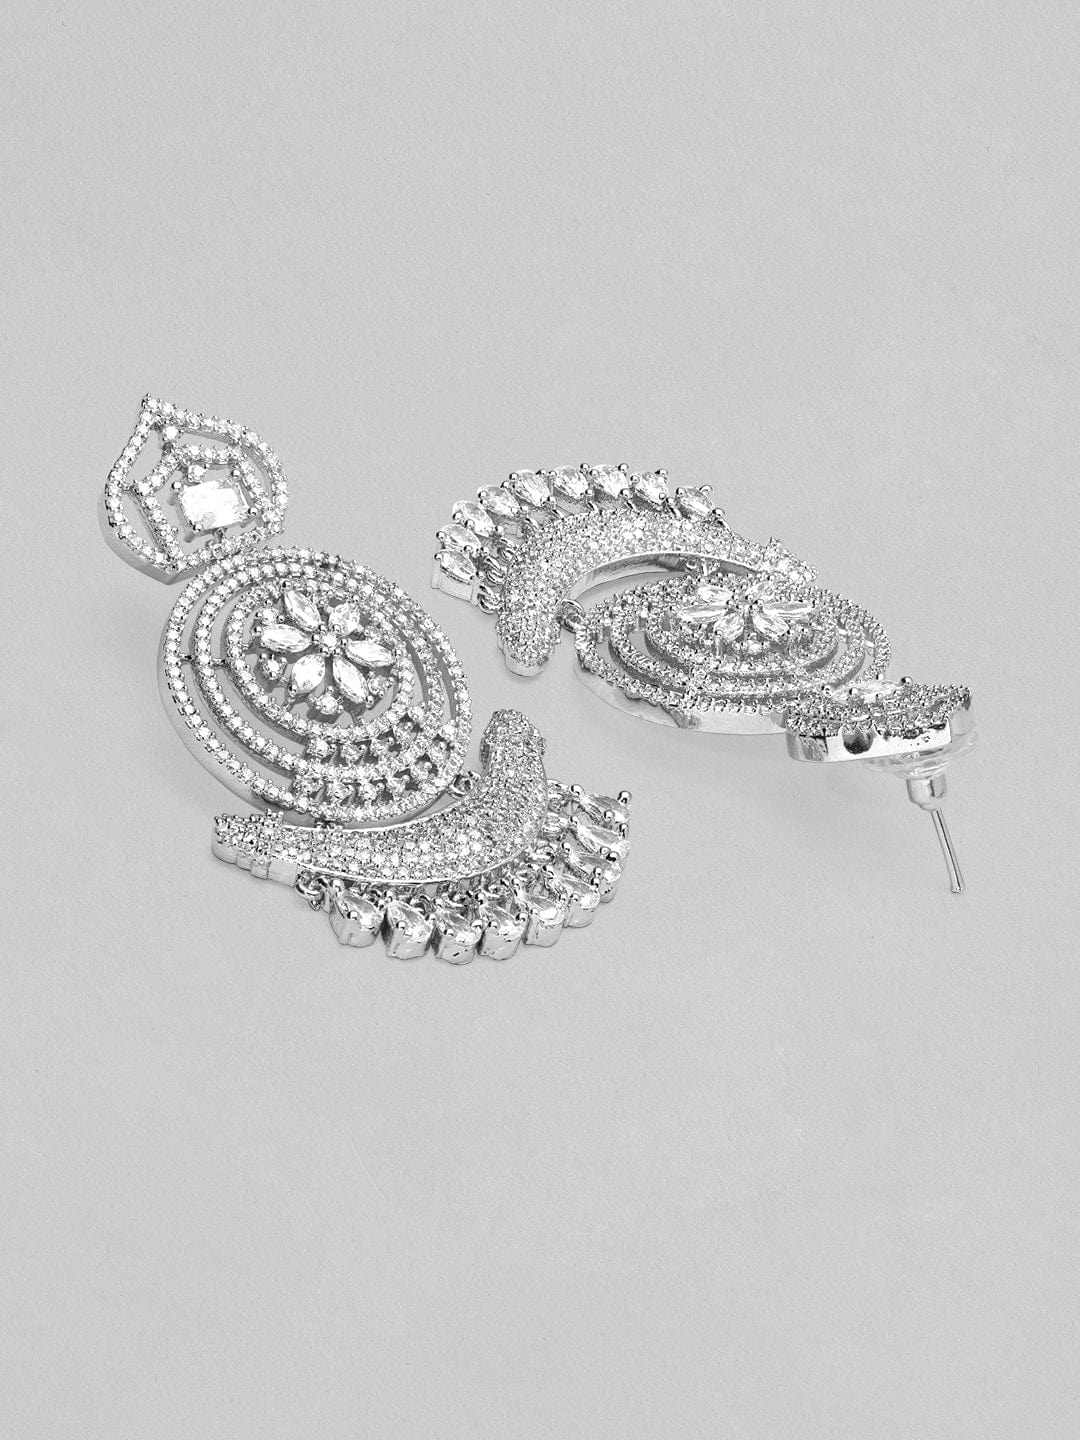 Rubans Silver Plated American Diamond Earrings With Studded Stones. Earrings